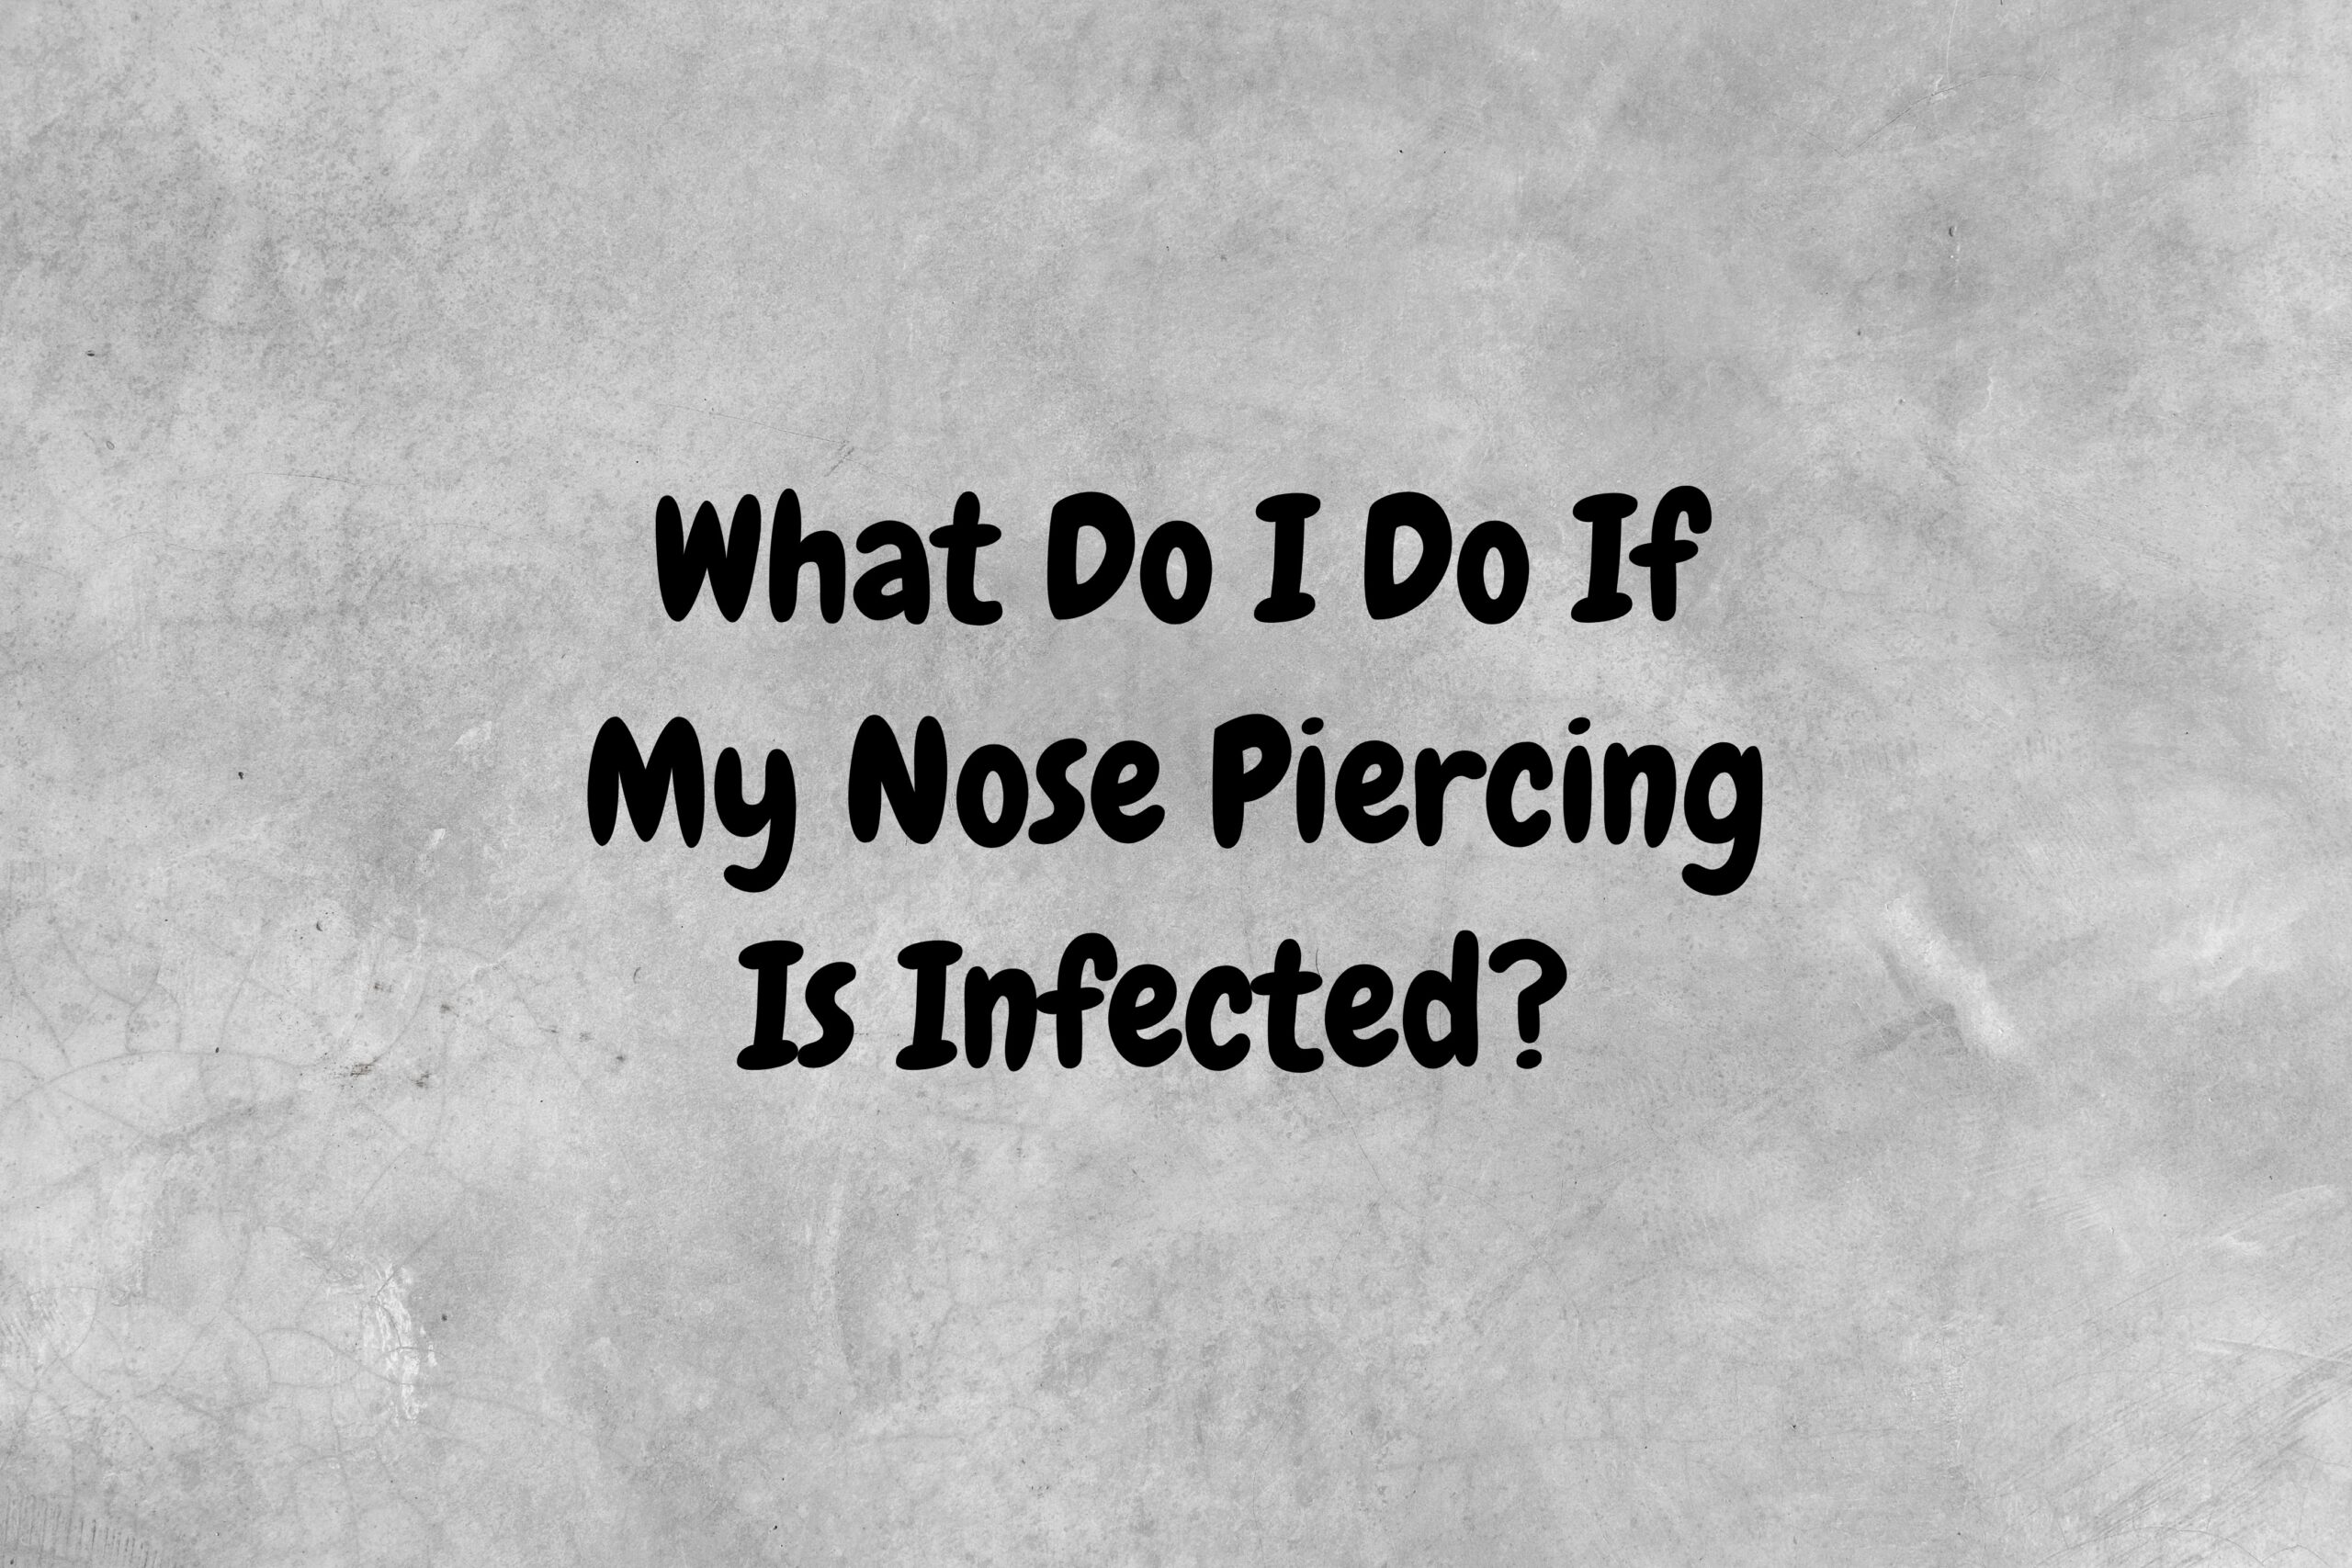 An image with a gray background and black text that asks the question, "What do I do if my nose piercing is infected?"